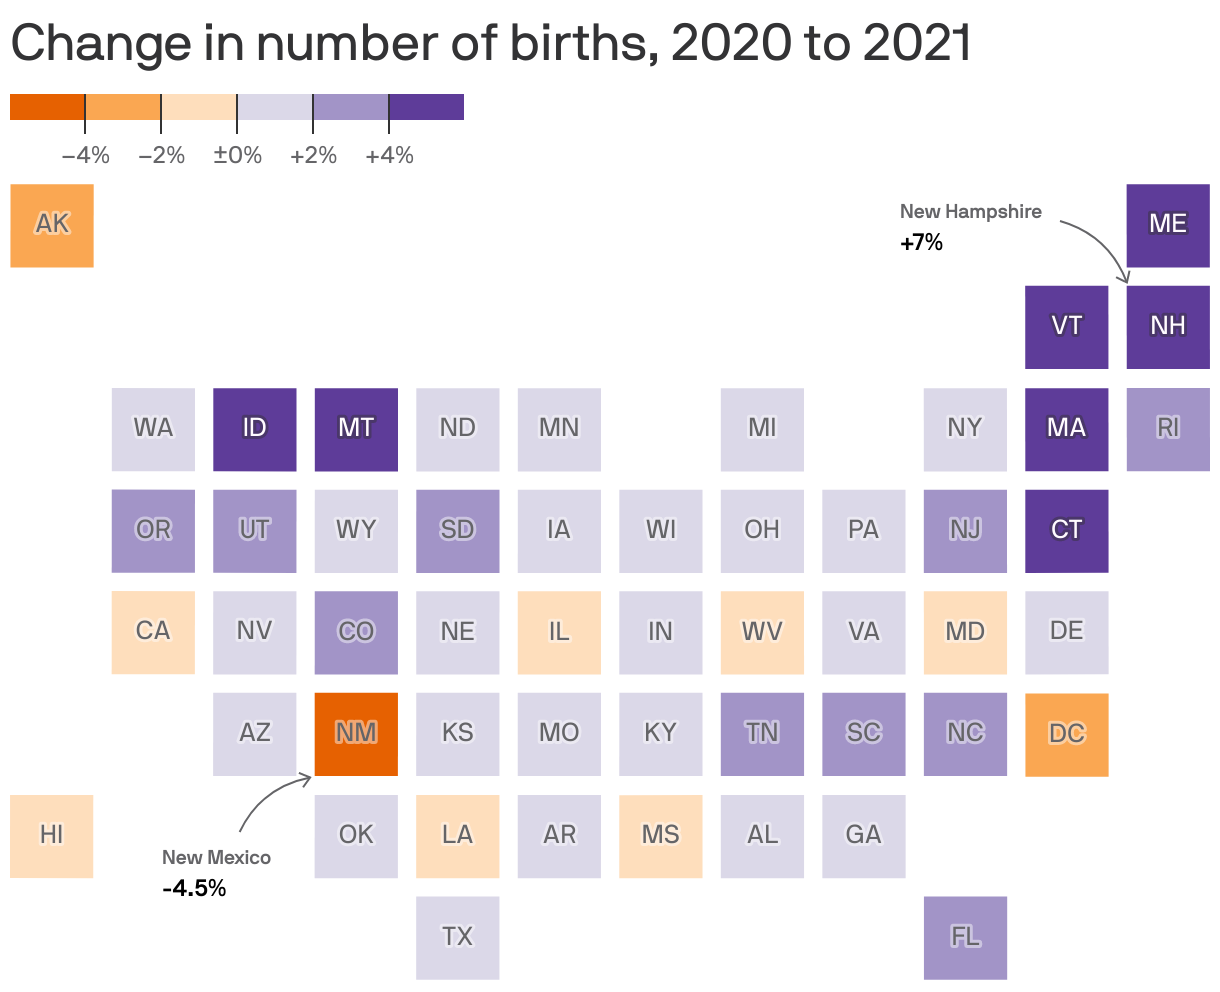 Change in number of births, 2020 to 2021